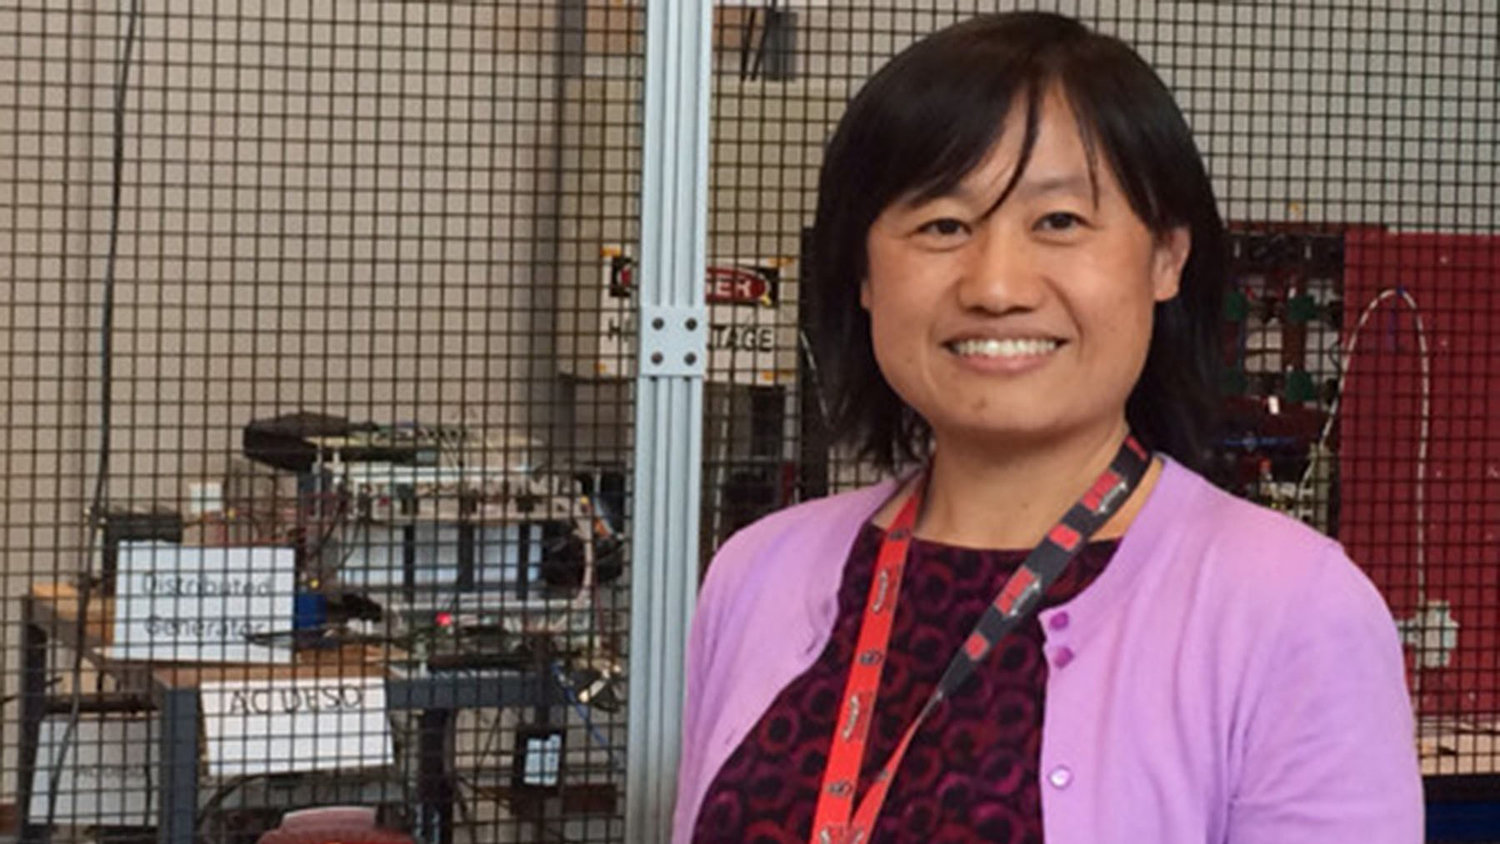 Ning Lu, wearing a lavender cardigan sweater and red lanyard, stands in front of laboratory equipment.